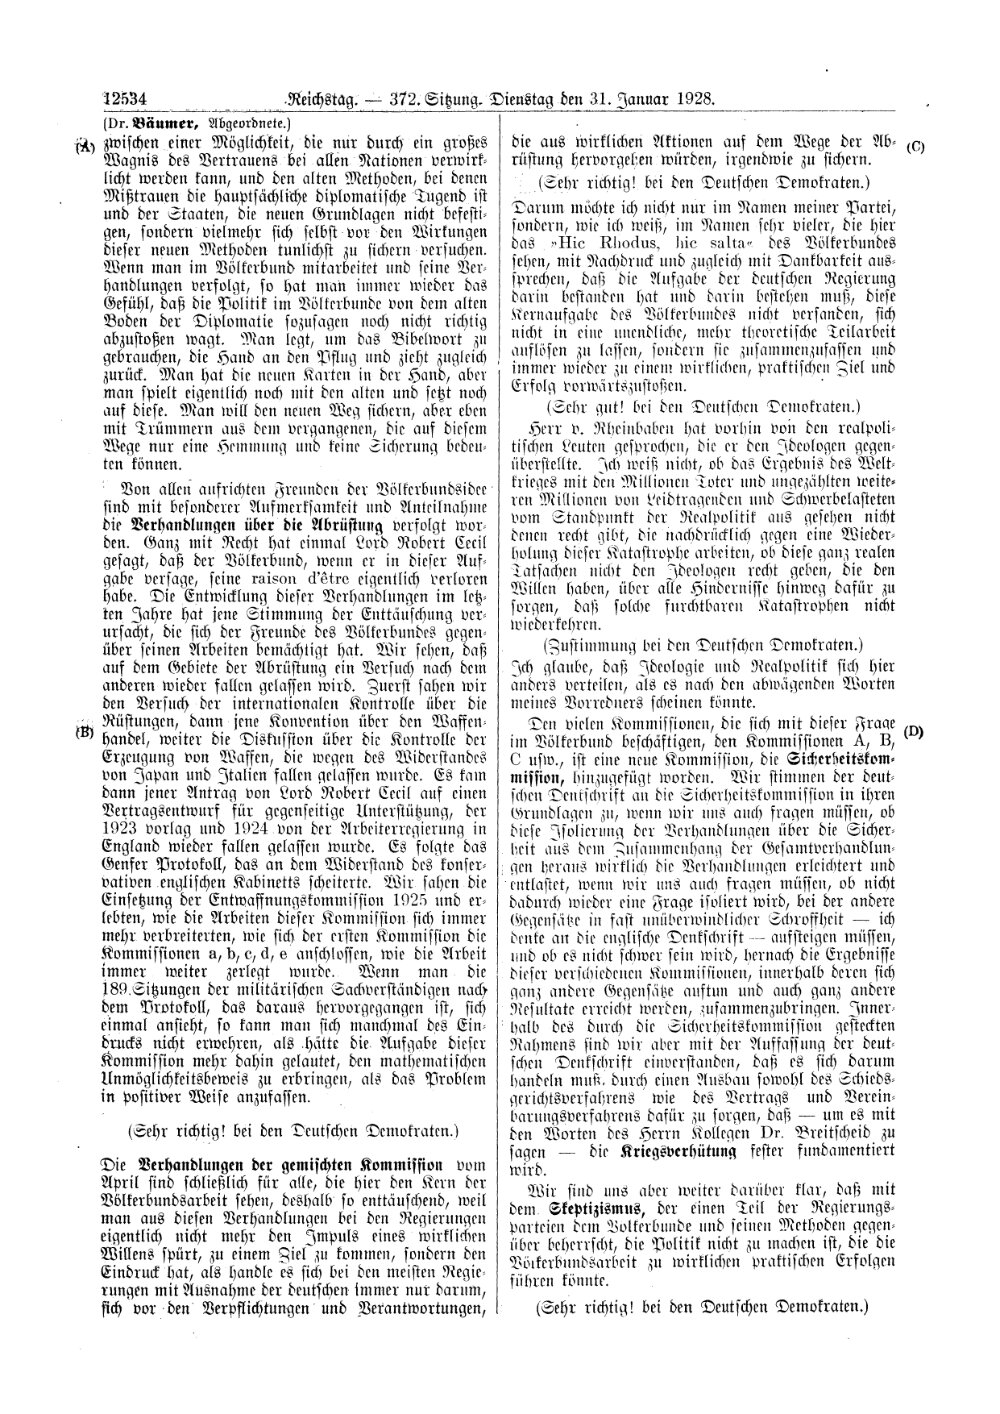 Scan of page 12534